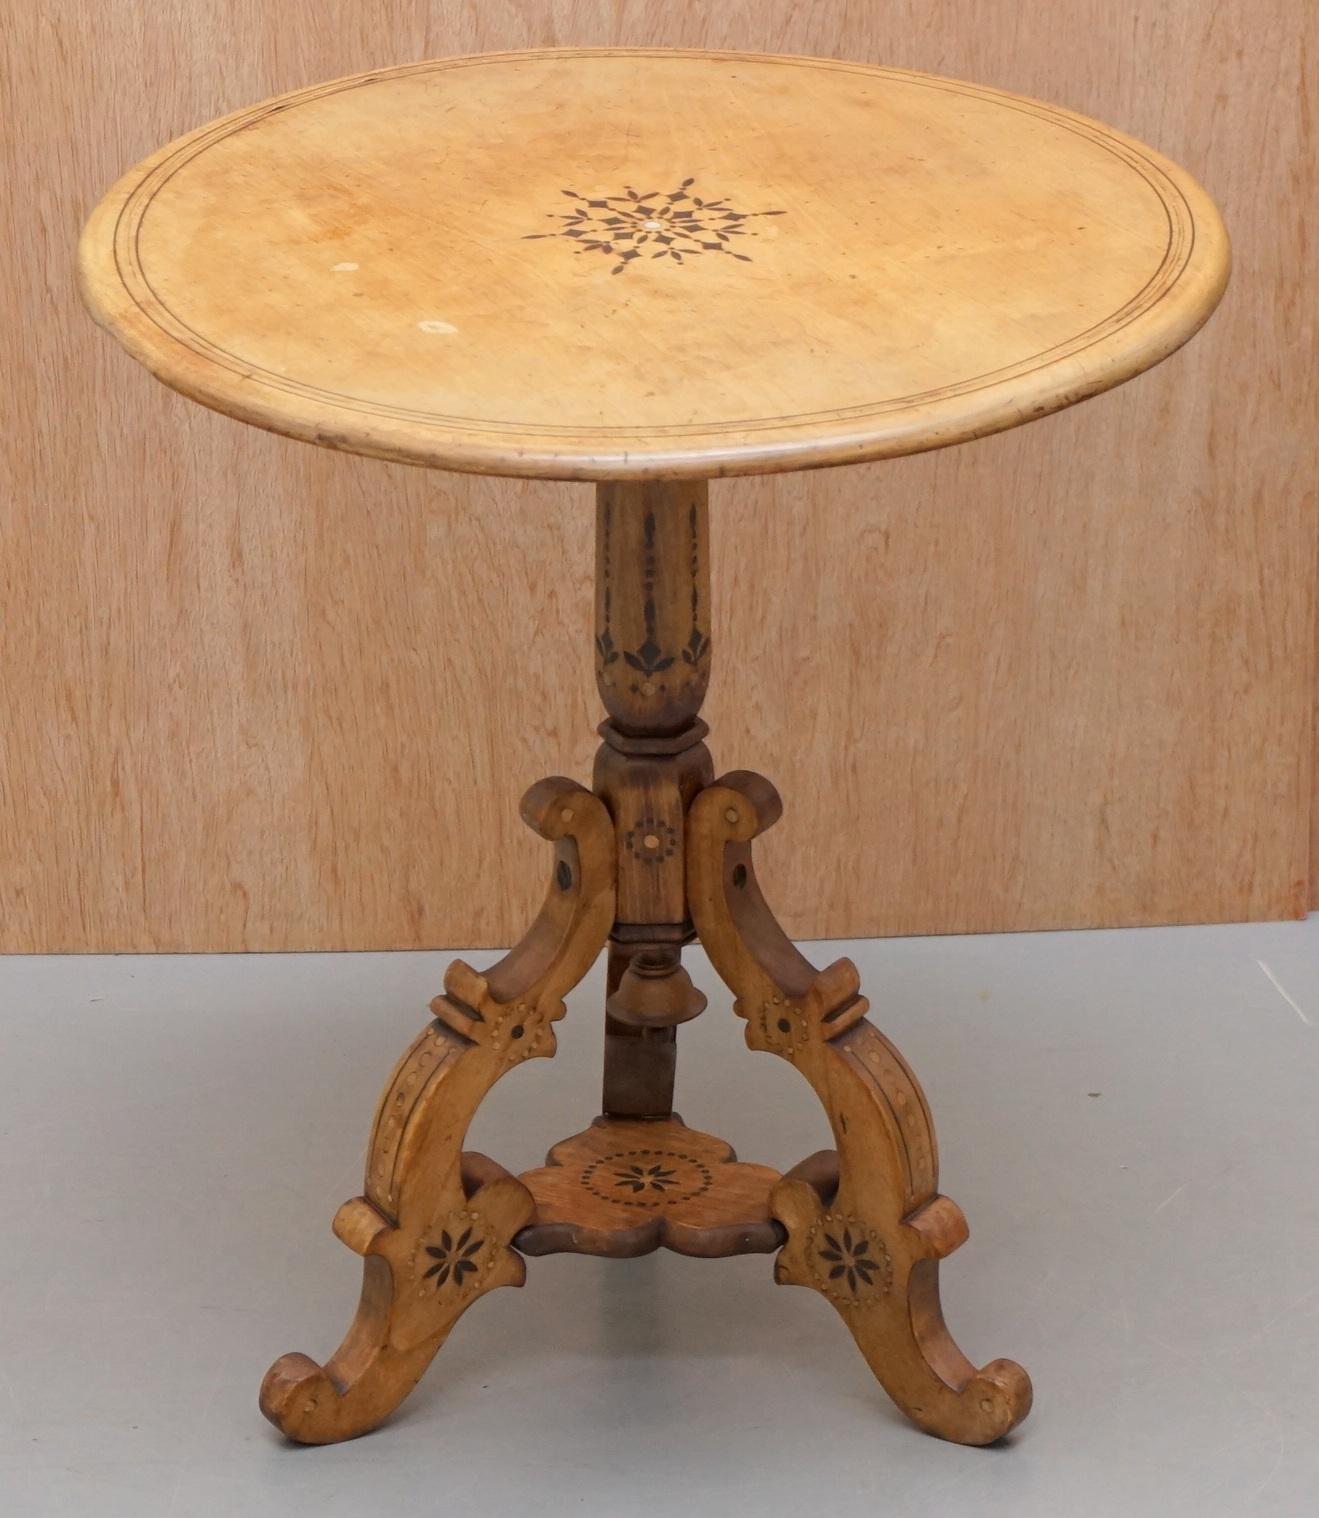 We are delighted to offer for sale this sublime Victorian Sycamore wood with mother of pearl inlay round tilt-top occasional table

A very good looking and collectable table, sycamore wood pieces are highly coveted as they bring light and a sense